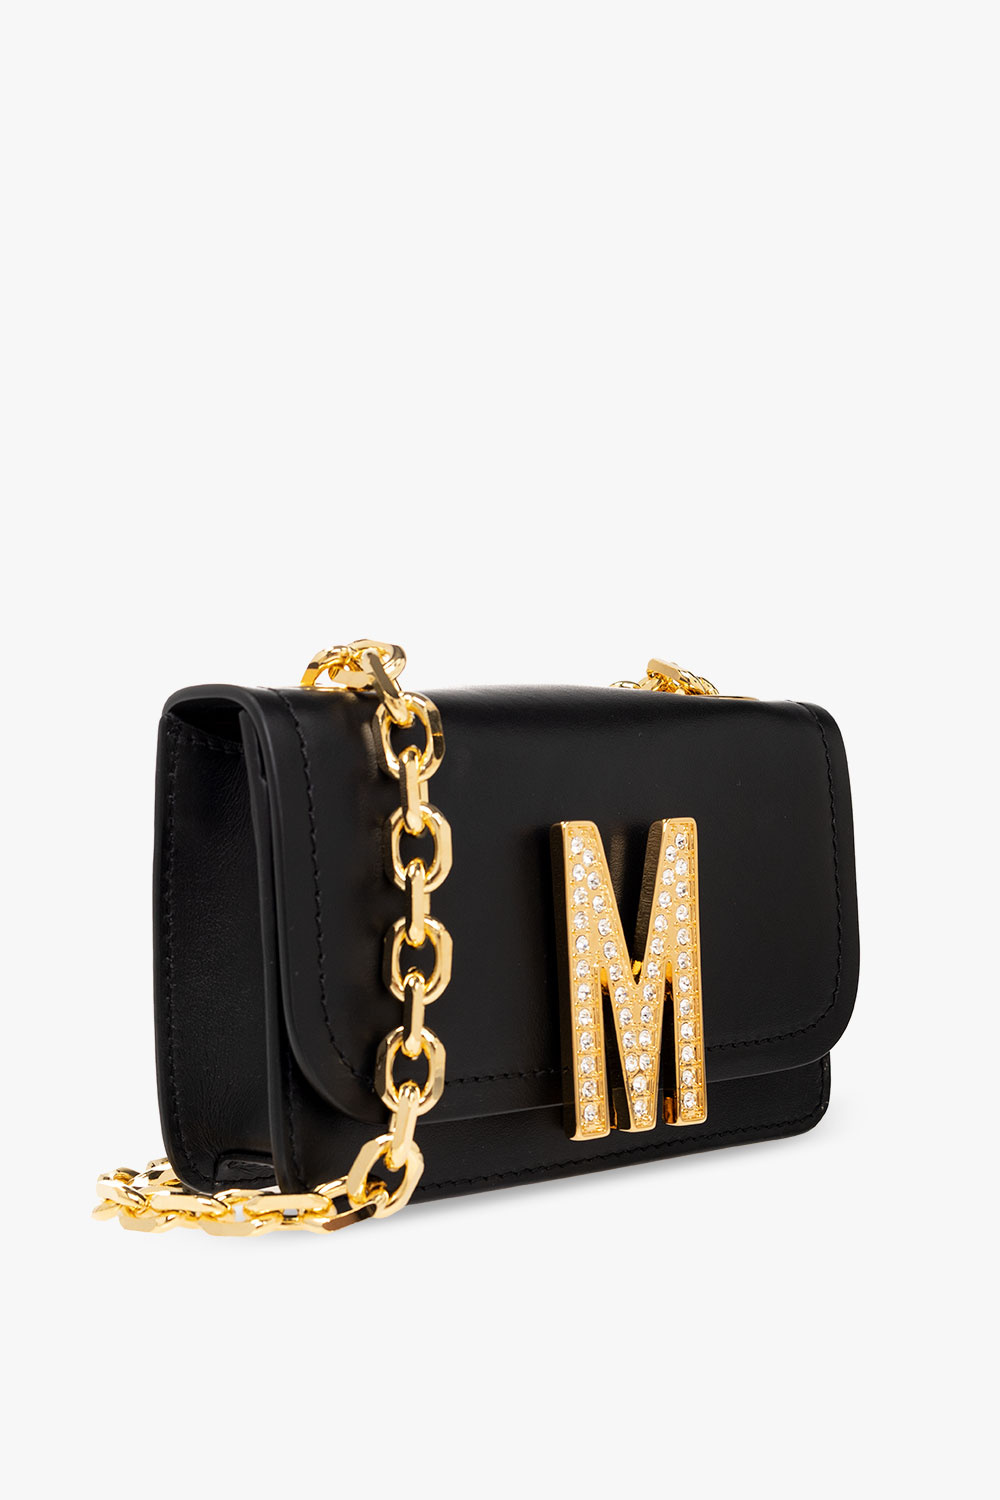 Moschino Quotations from second hand bags Burberry Dryden